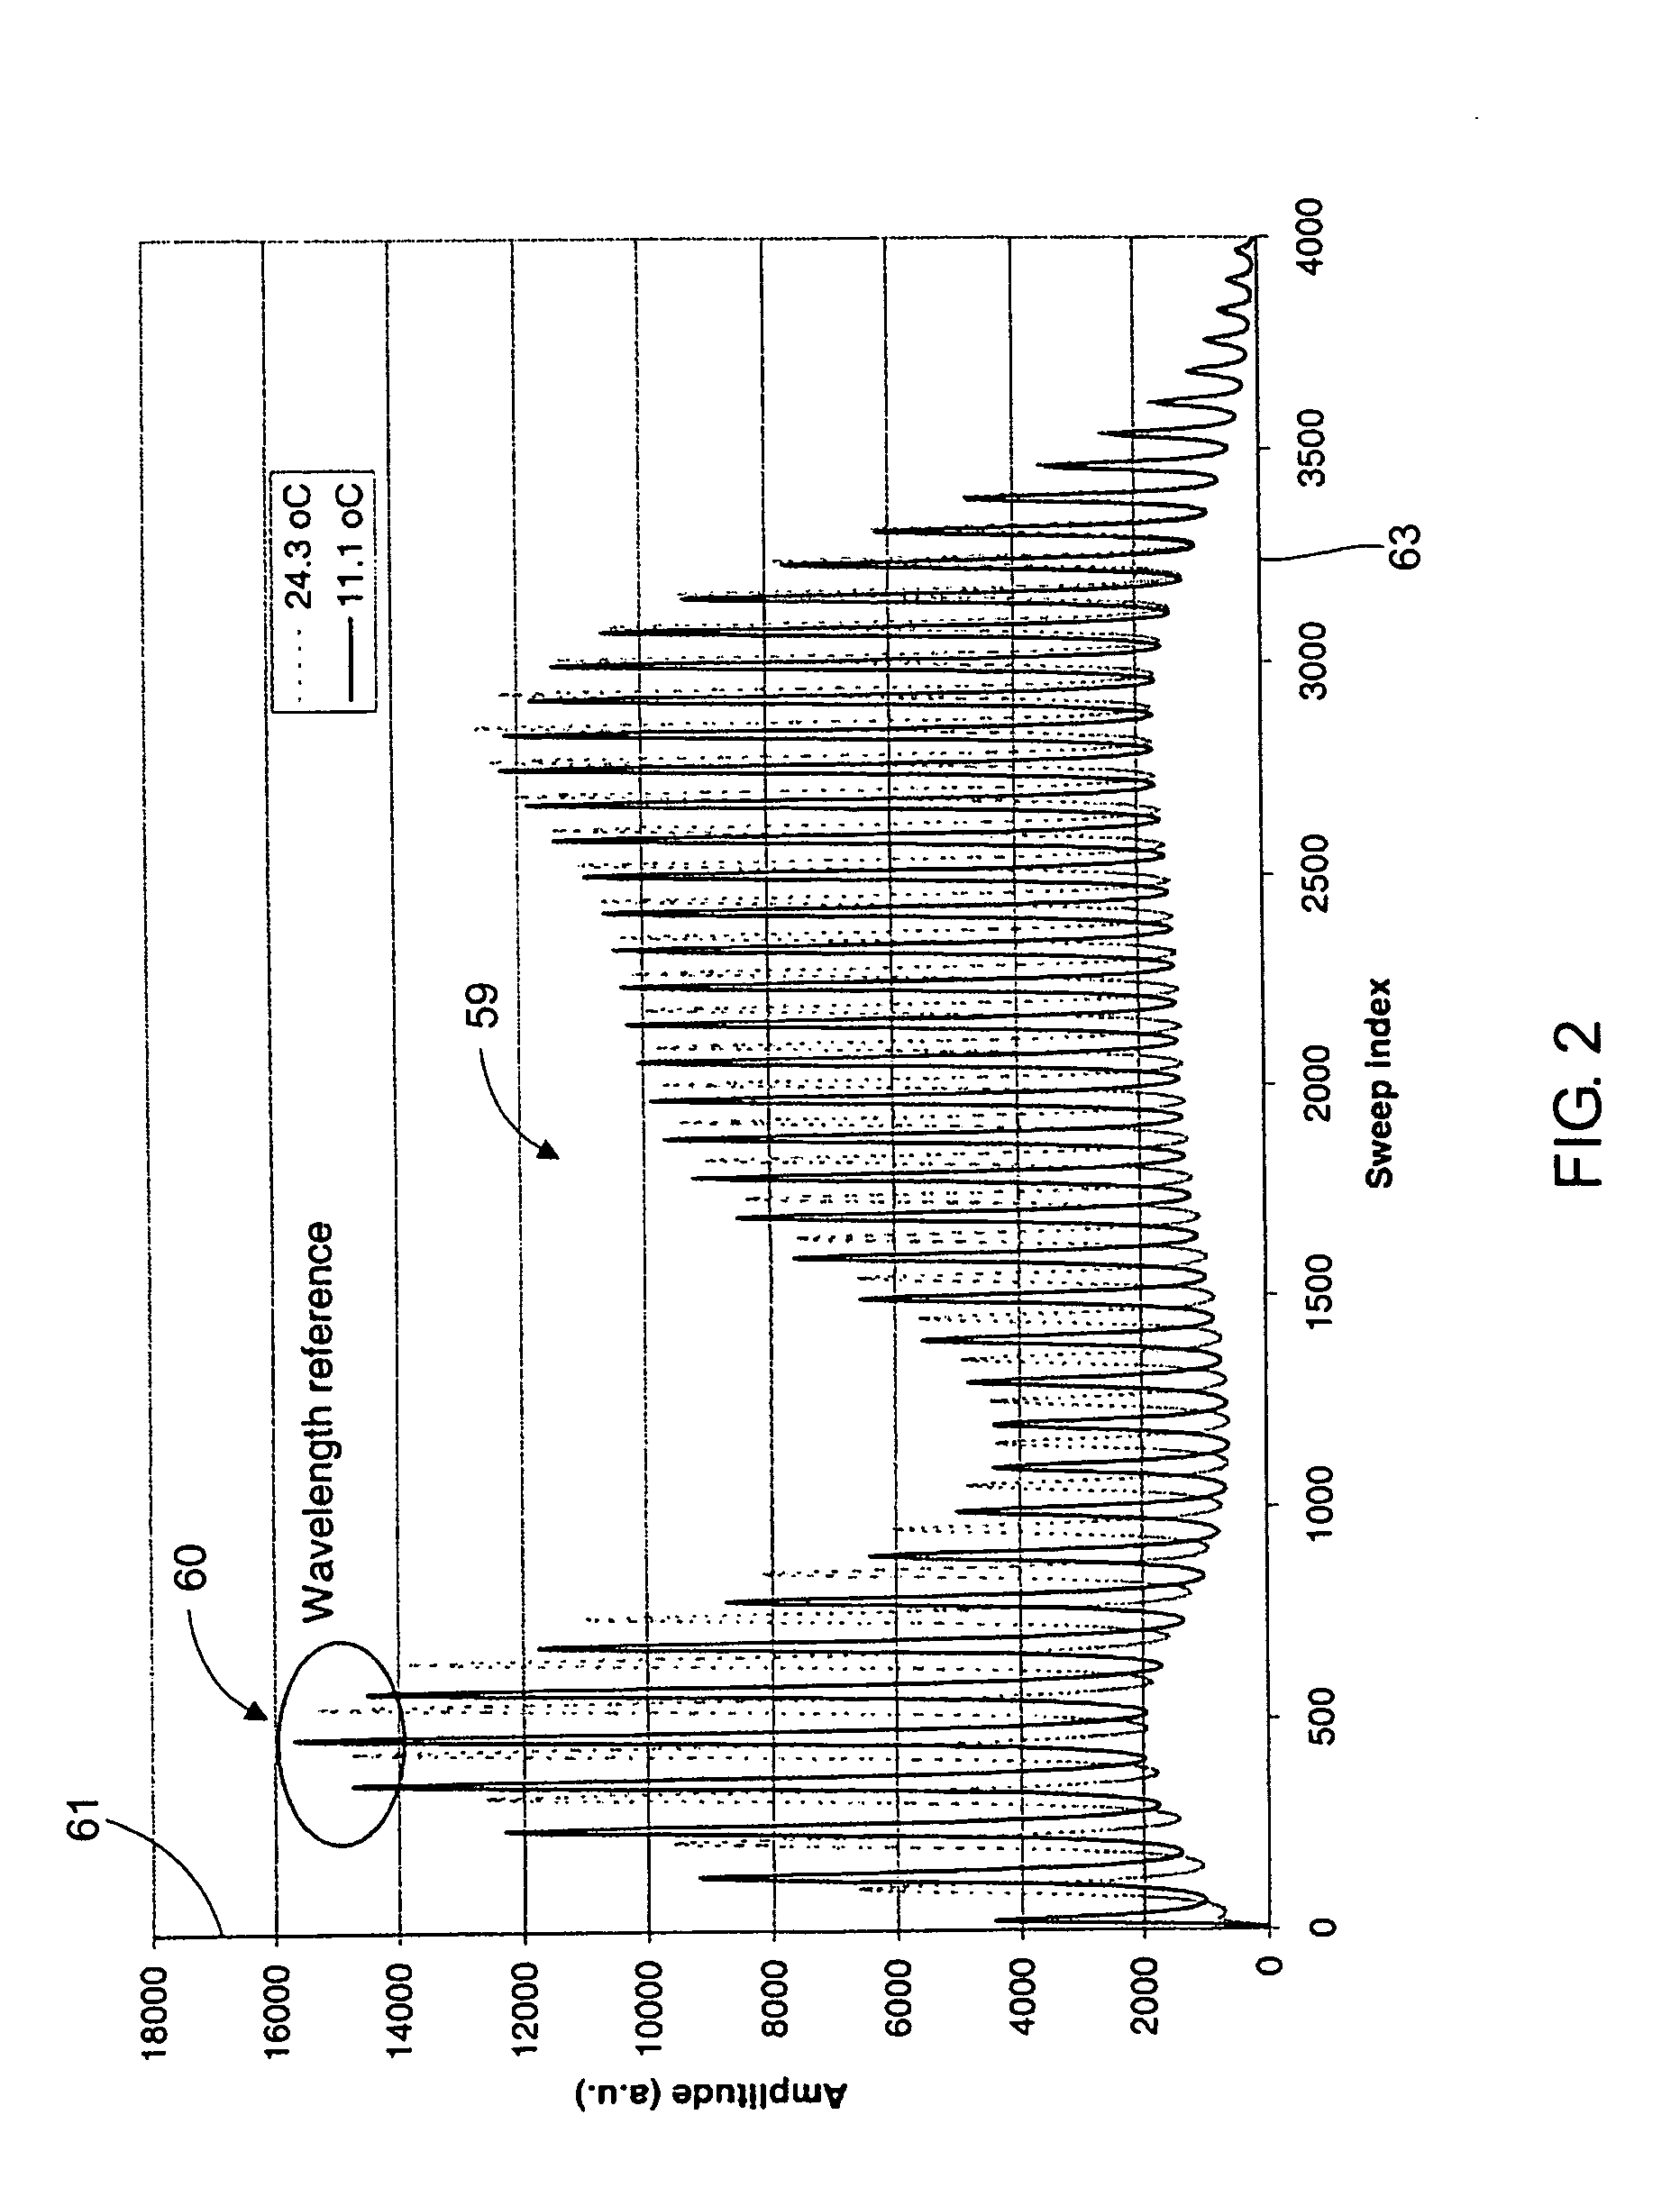 Wavelength reference system for optical measurements